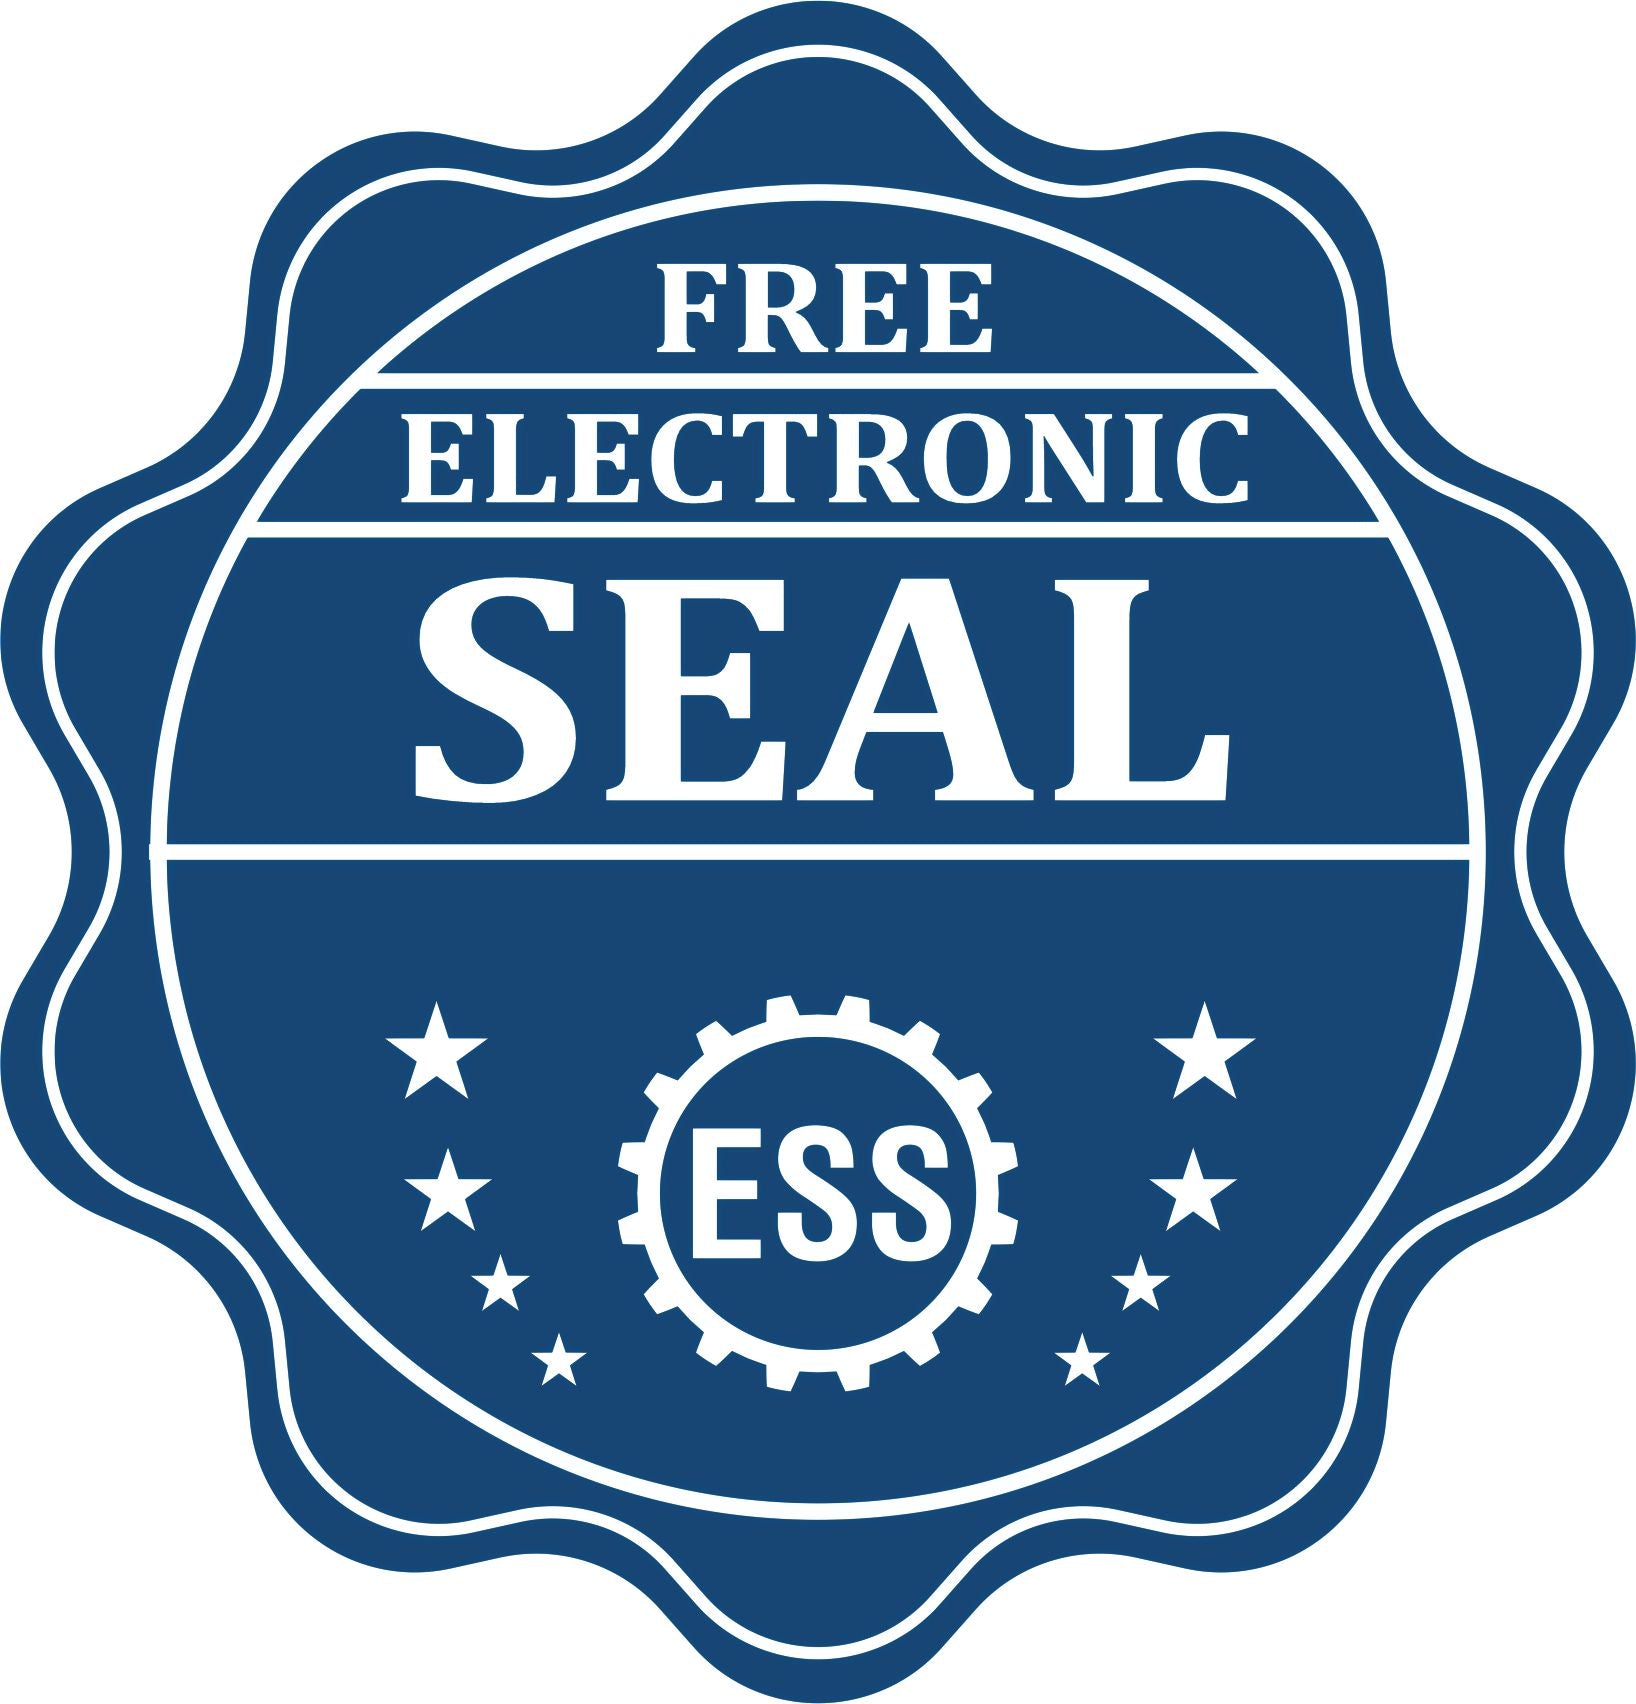 A badge showing a free electronic seal for the Hybrid Connecticut Land Surveyor Seal with stars and the ESS gear on the emblem.